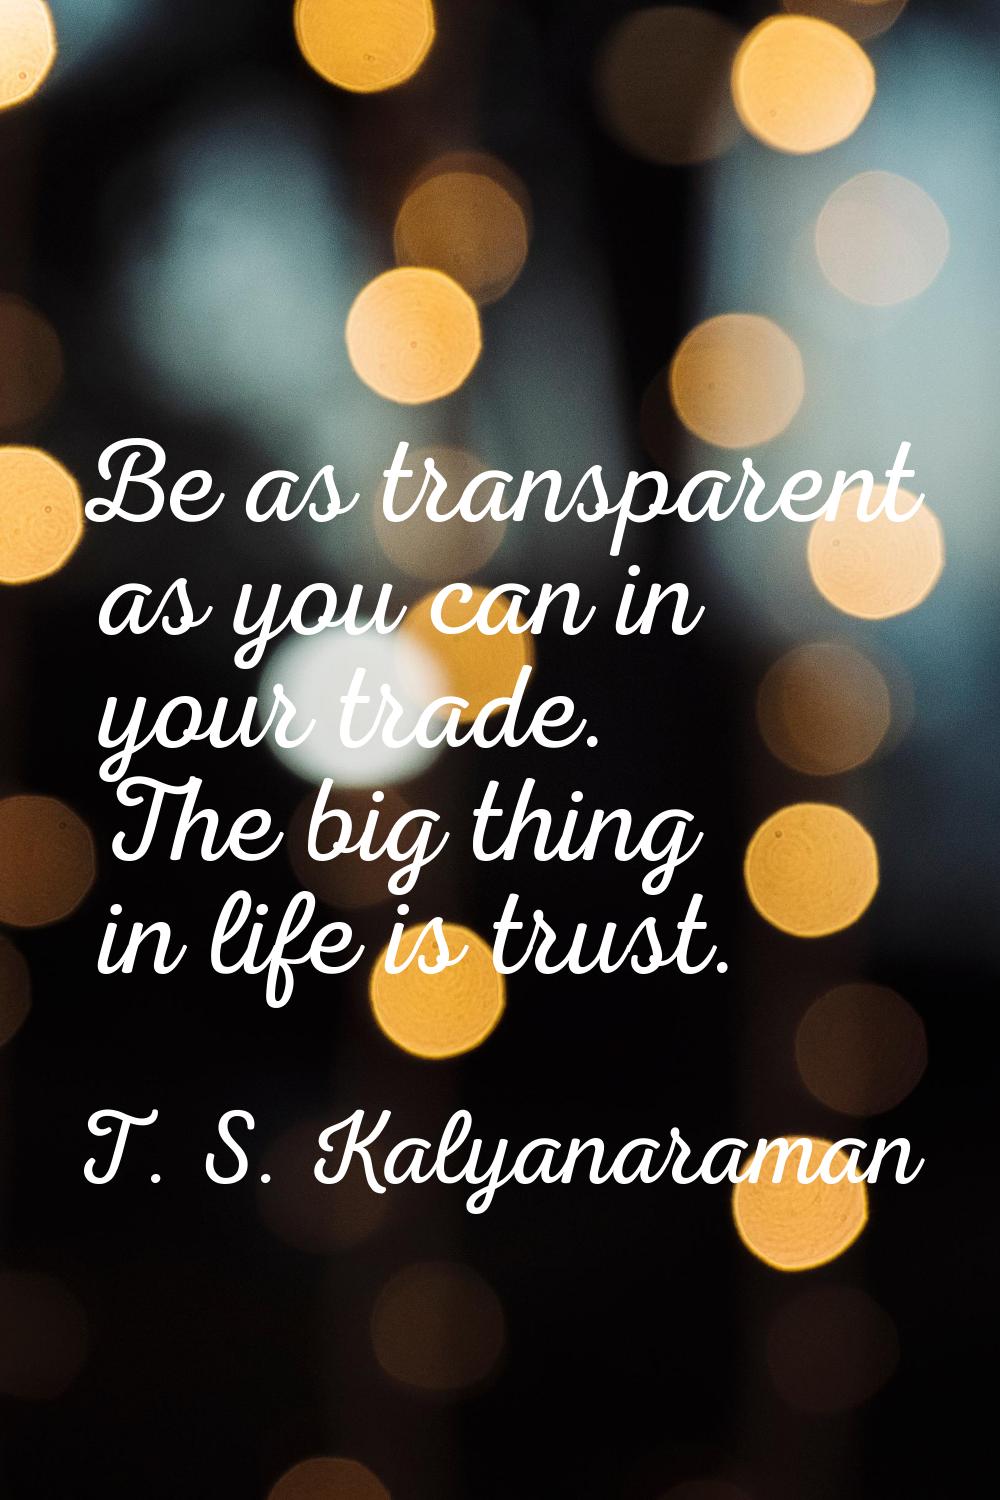 Be as transparent as you can in your trade. The big thing in life is trust.